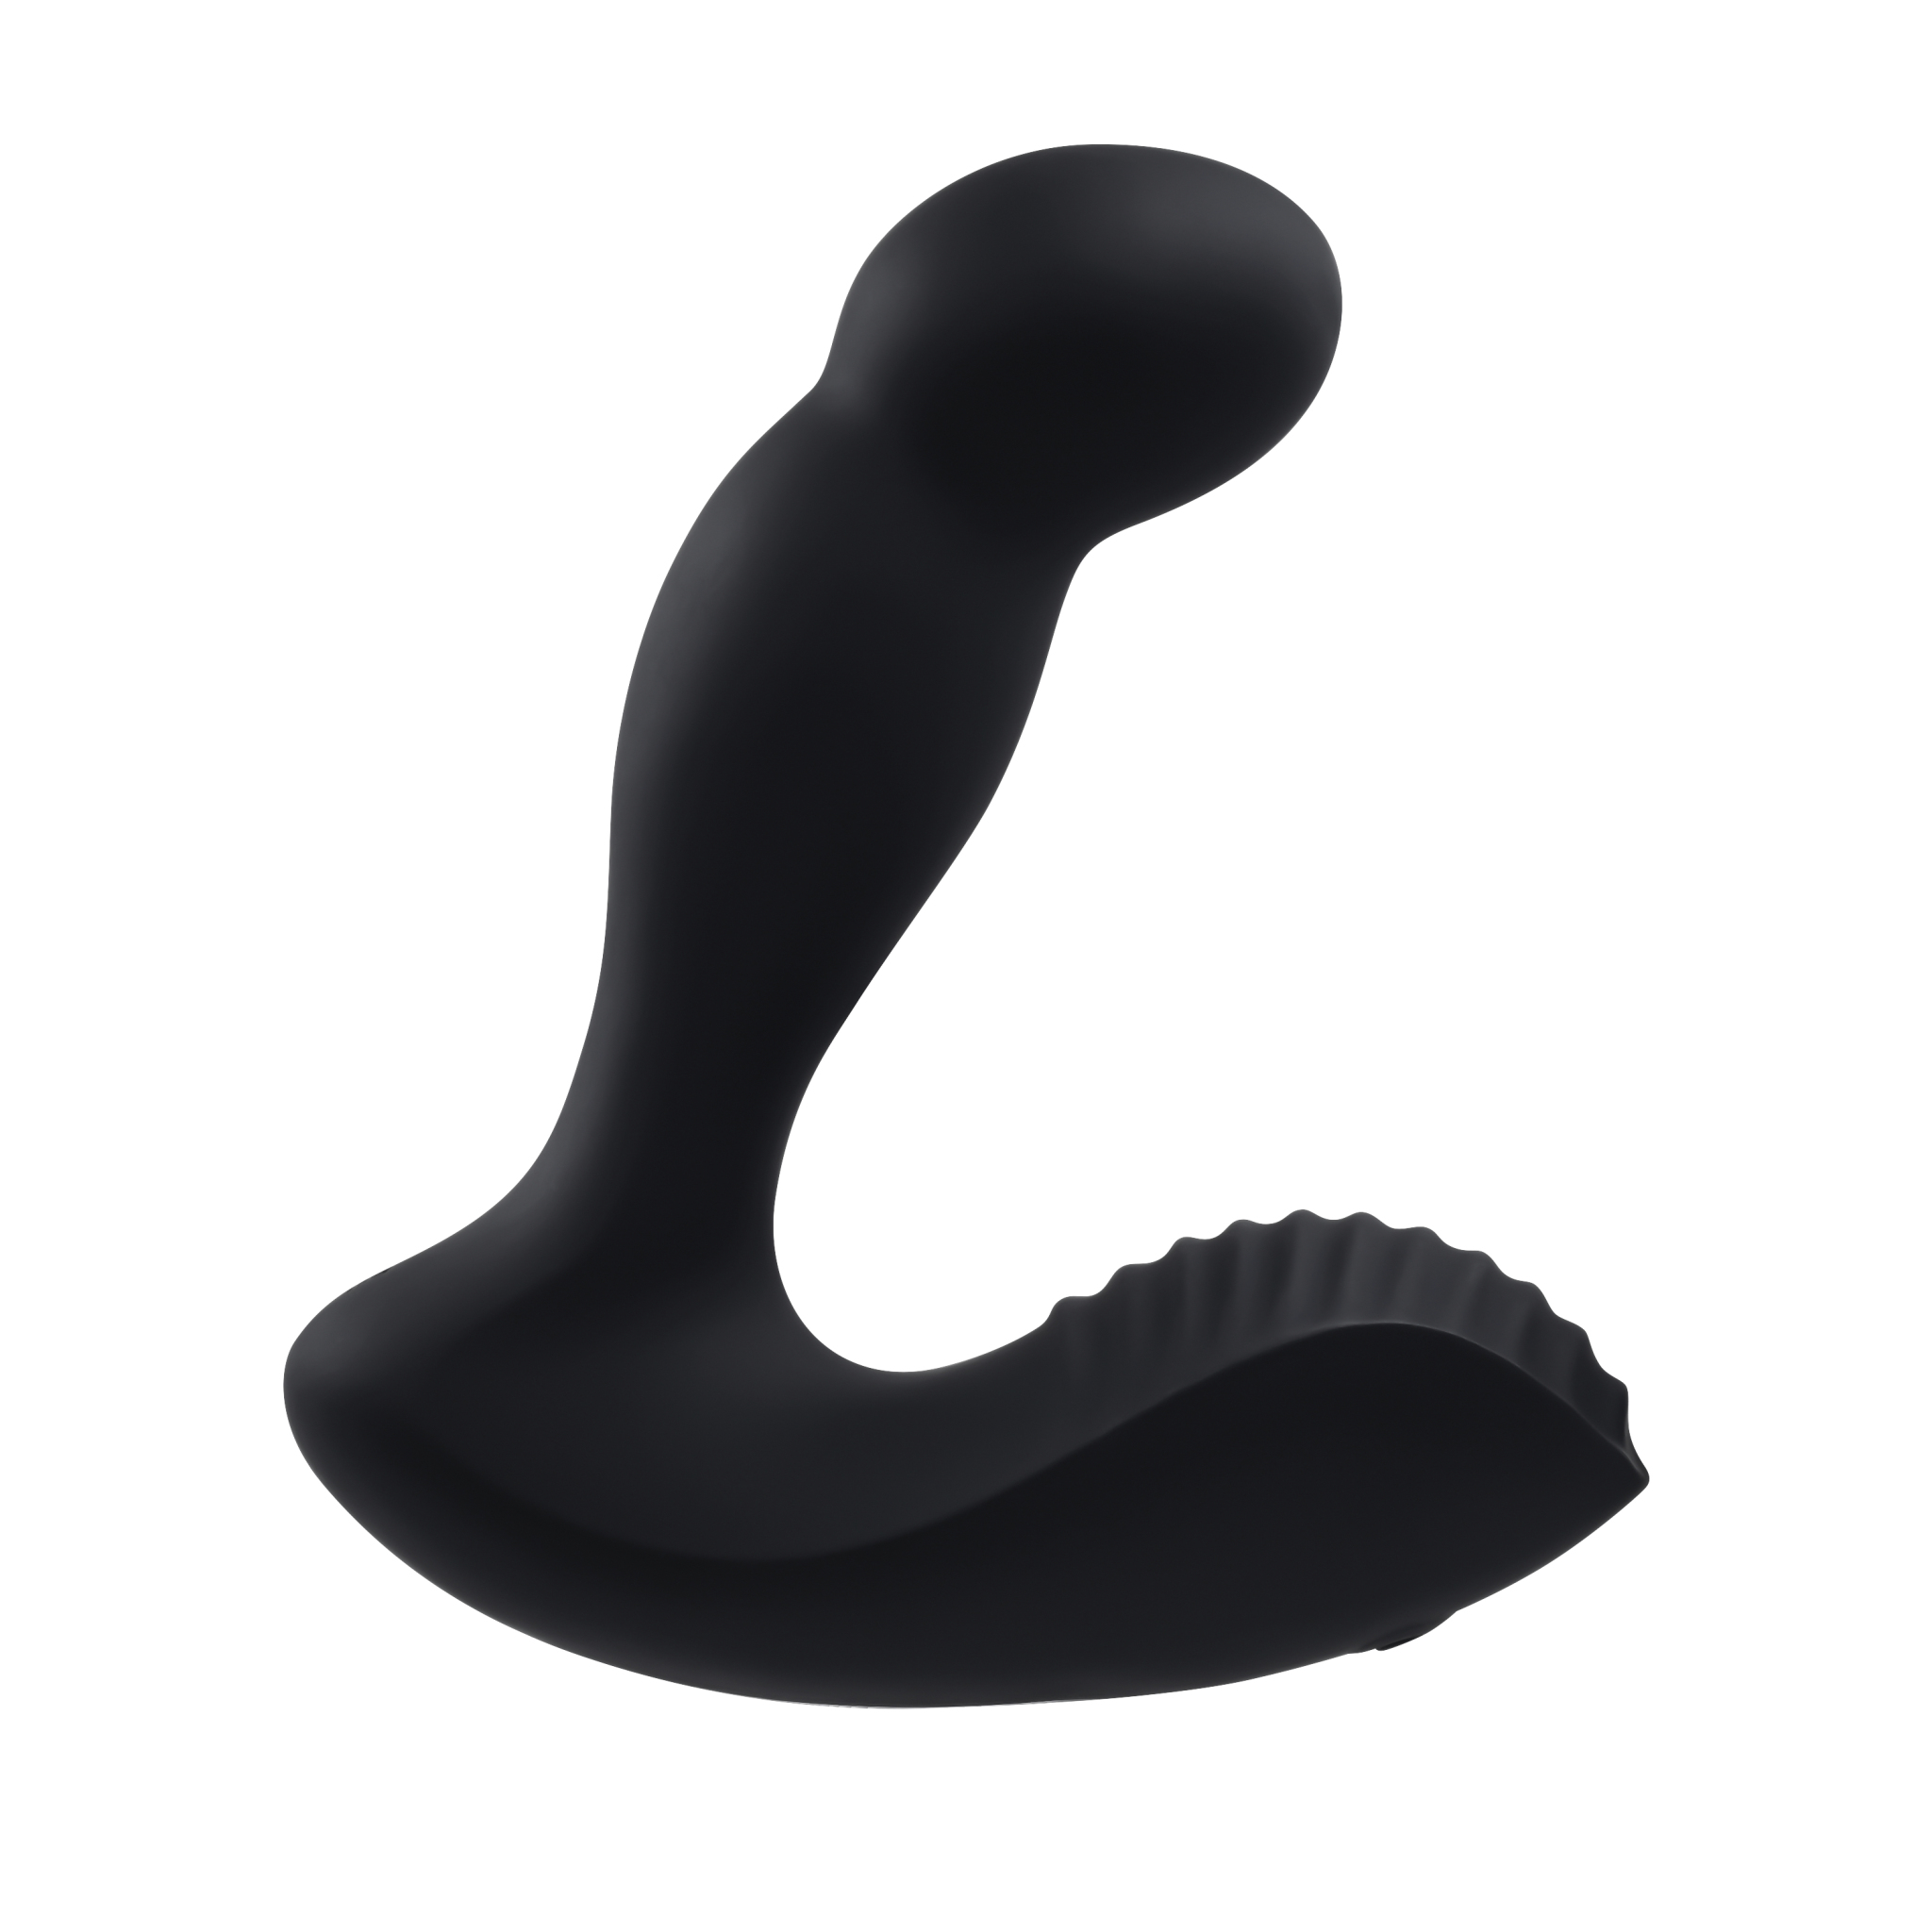 ADAM & EVE ADAMS COME HITHER PROSTATE MASSAGER - ENAEWF01052